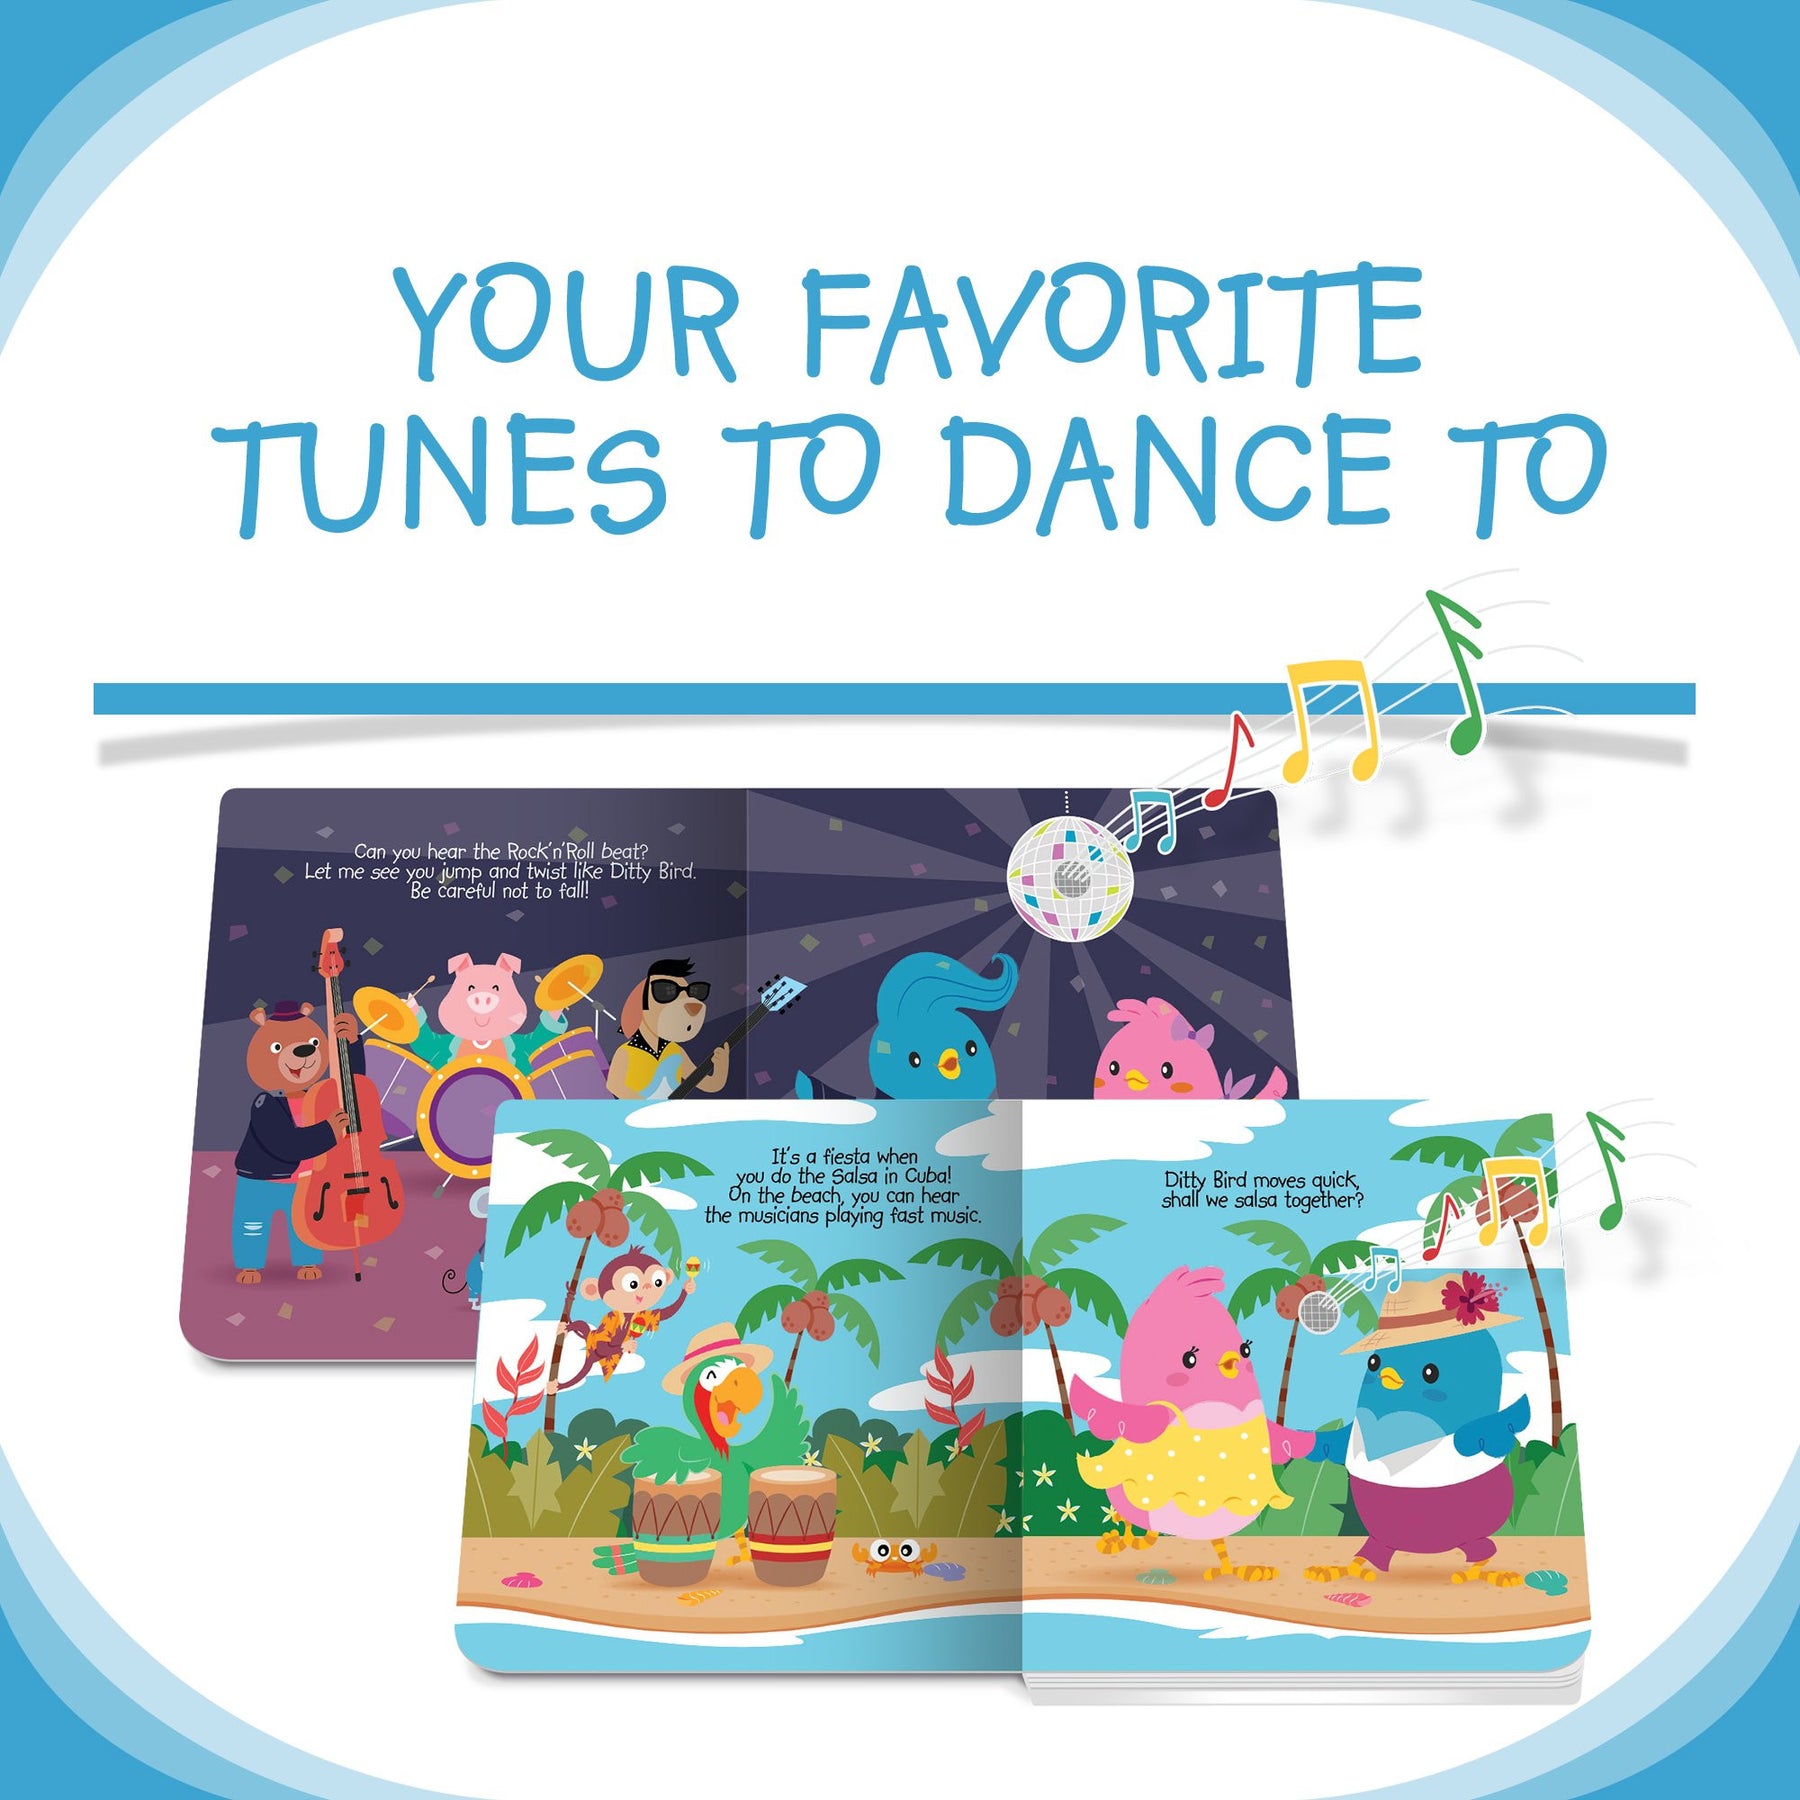 Ditty Bird Music To Dance To Sounds Book [Authentic] - Audio Sound Book for Children Ages 1+ Ready Stocks [B1-3 OTHERS]